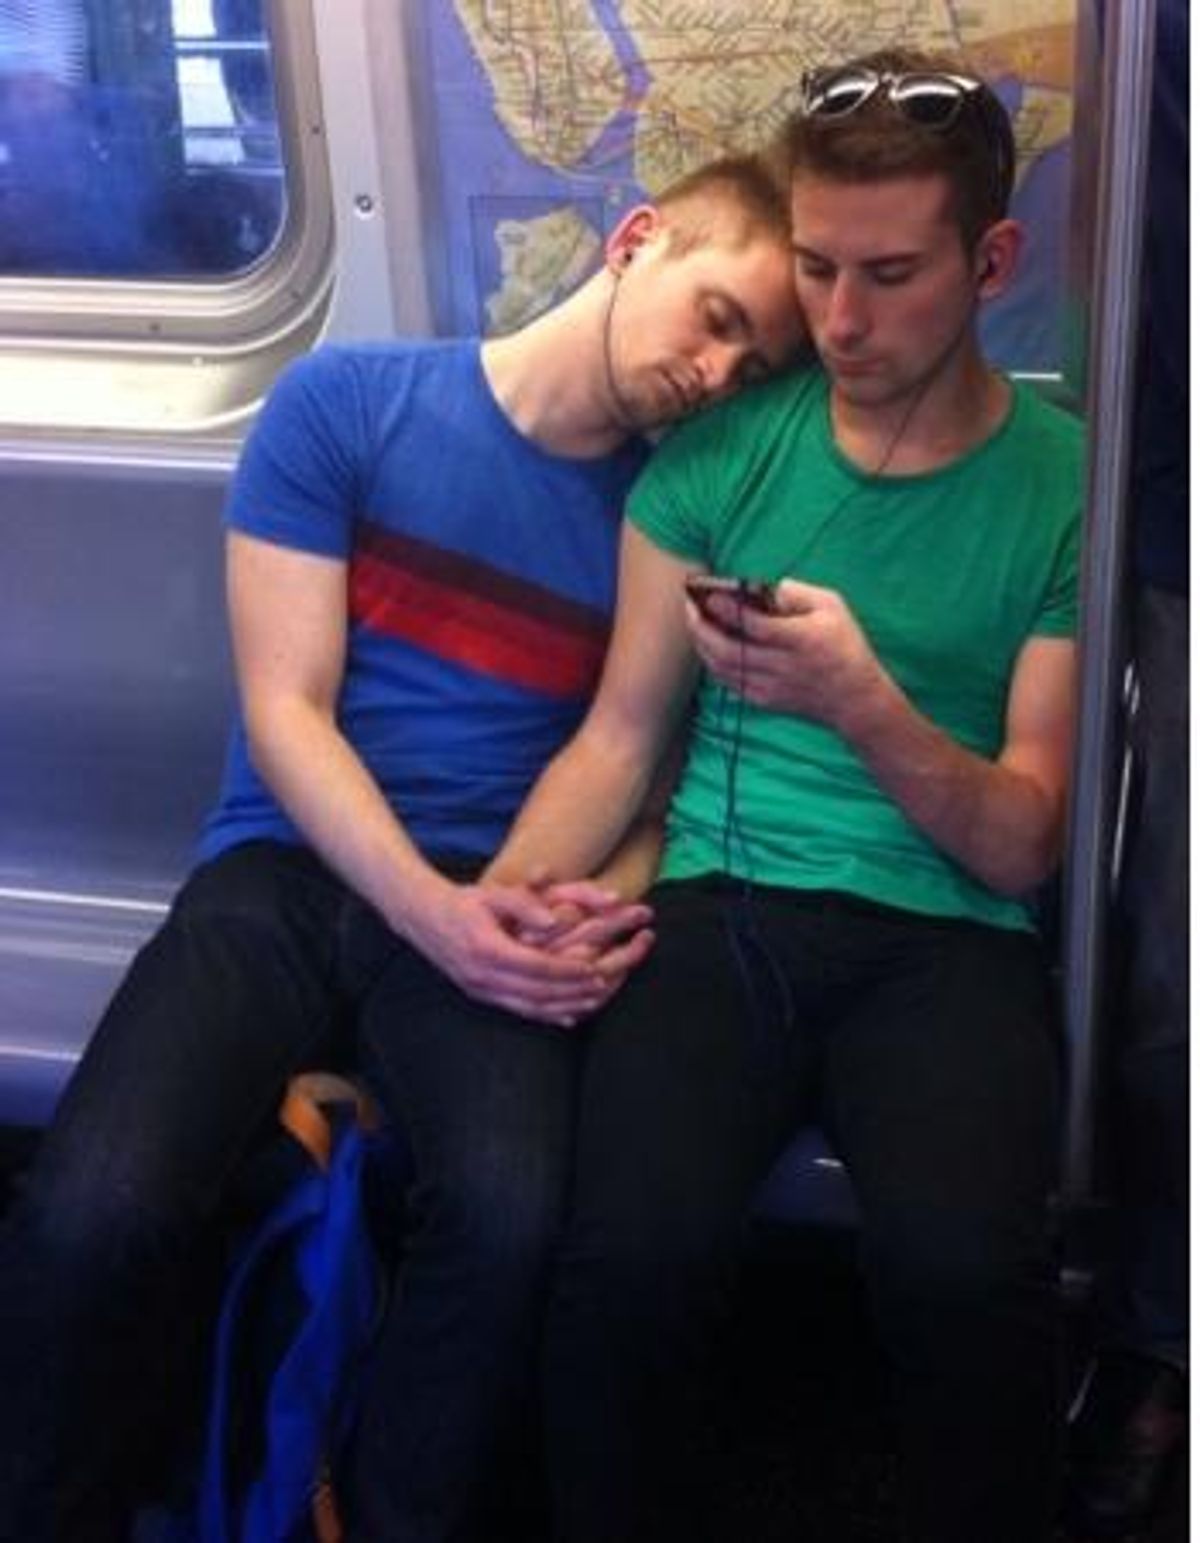 Site on Hot Men of NYC Subway Shutting Down